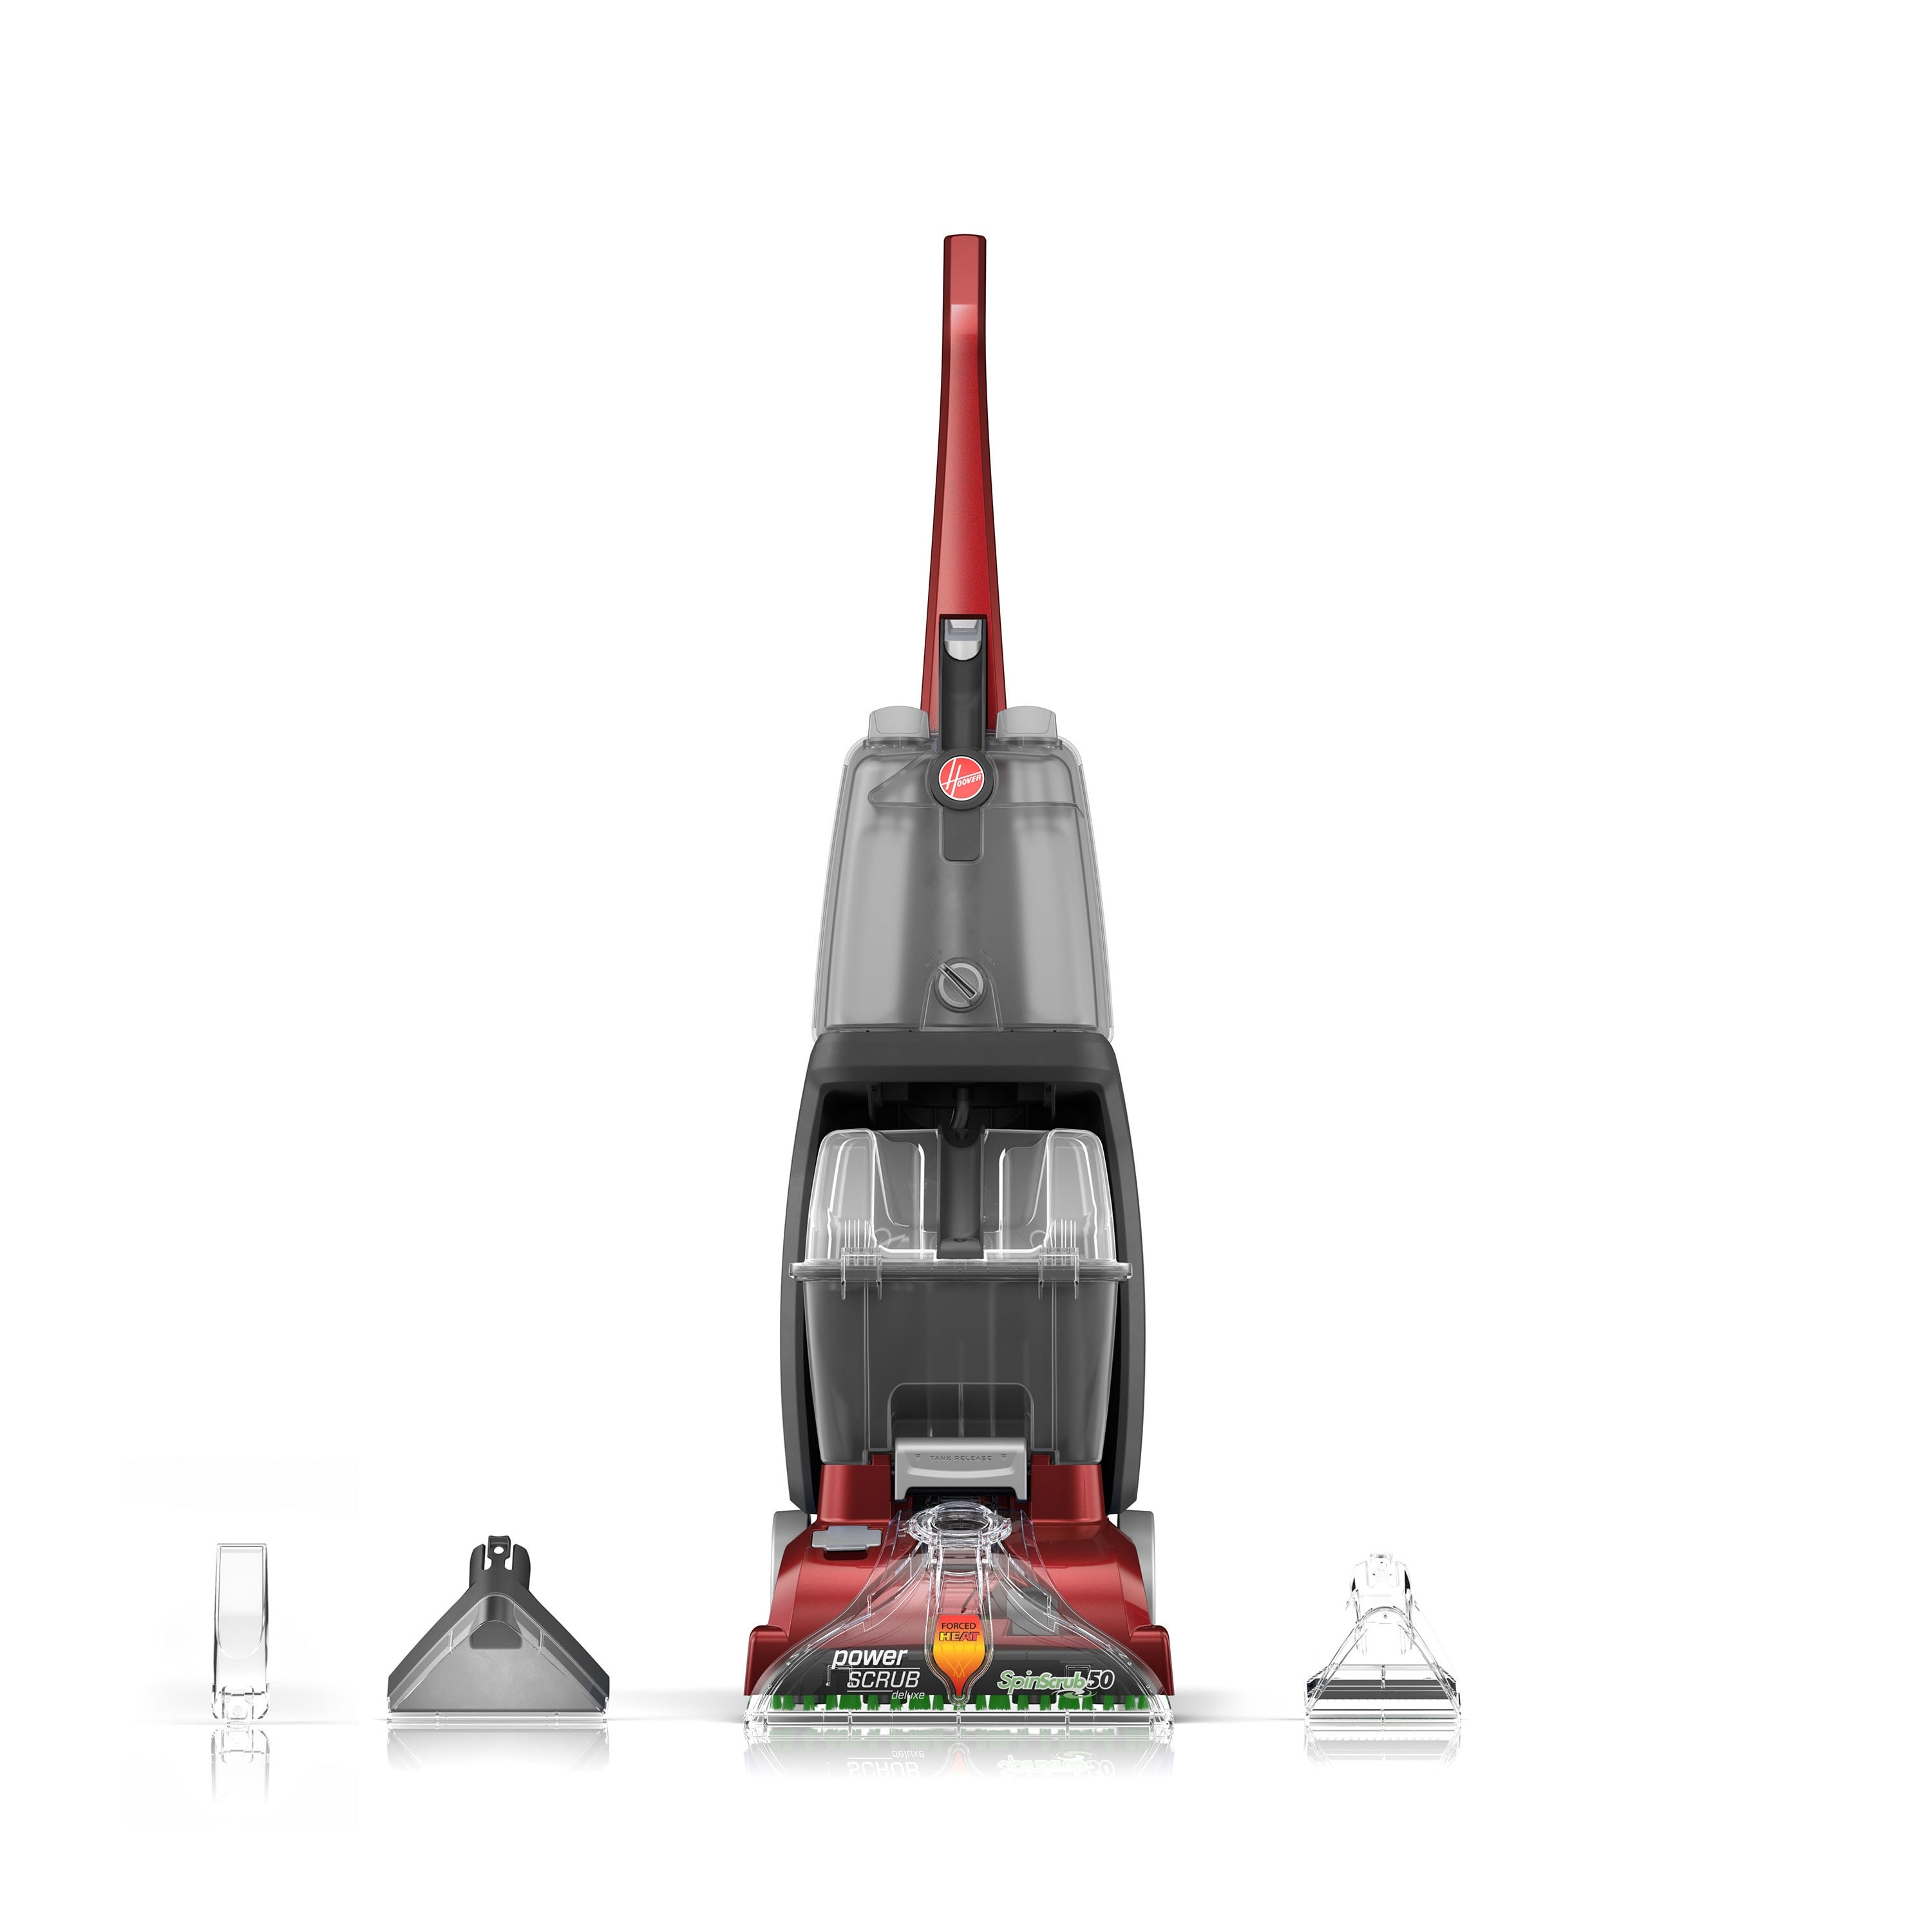 hoover pro clean pet carpet cleaner fh51010 manual